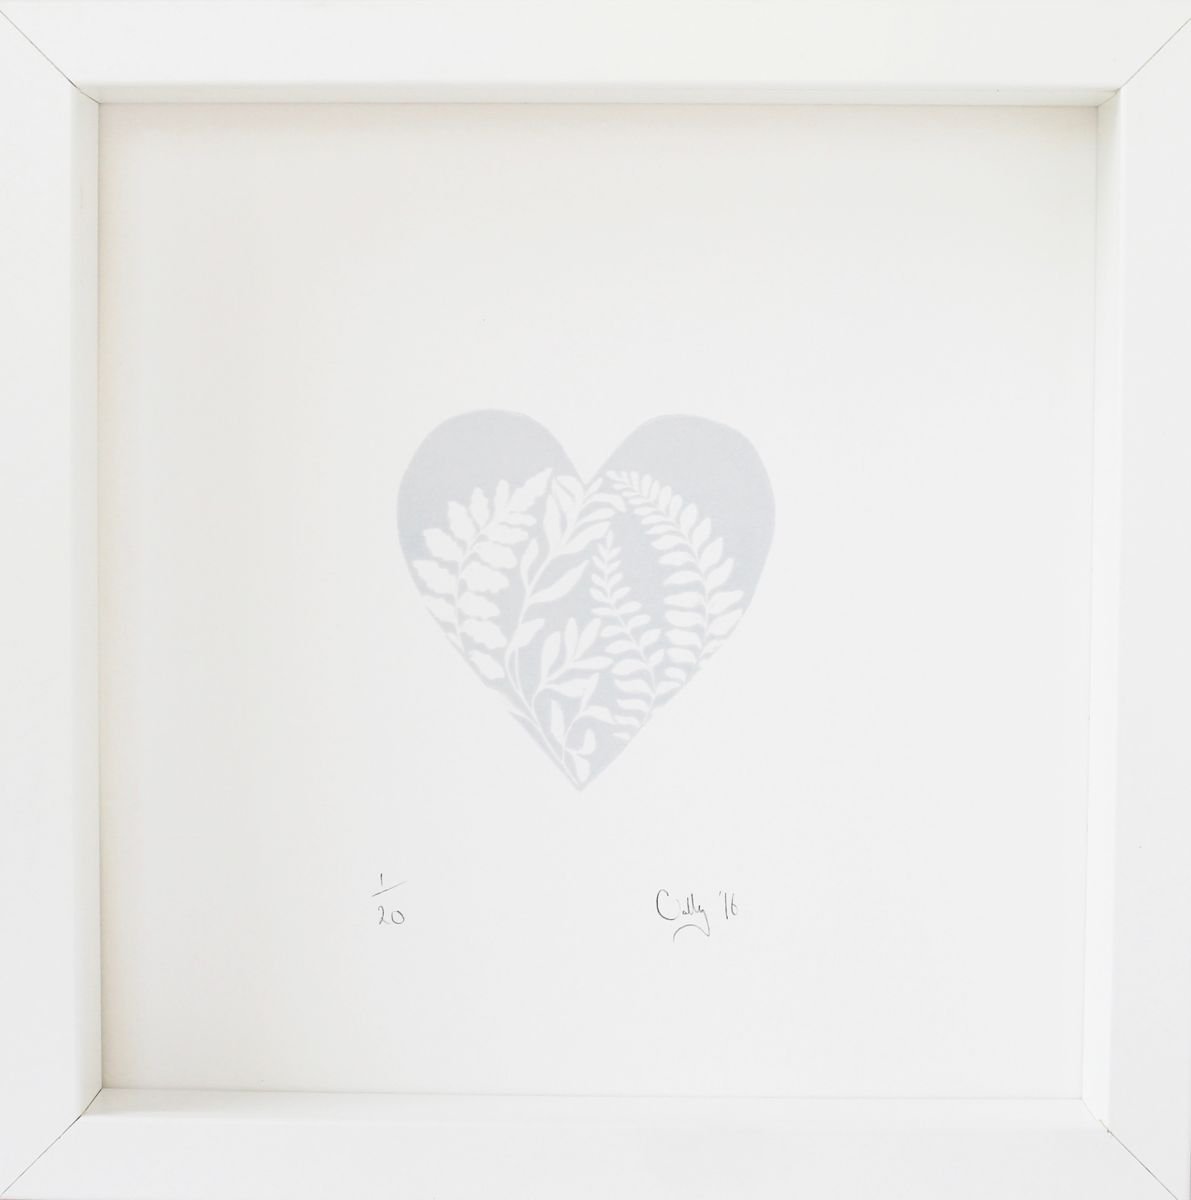 Limited edition Fern Heart lino print by Cally Conway